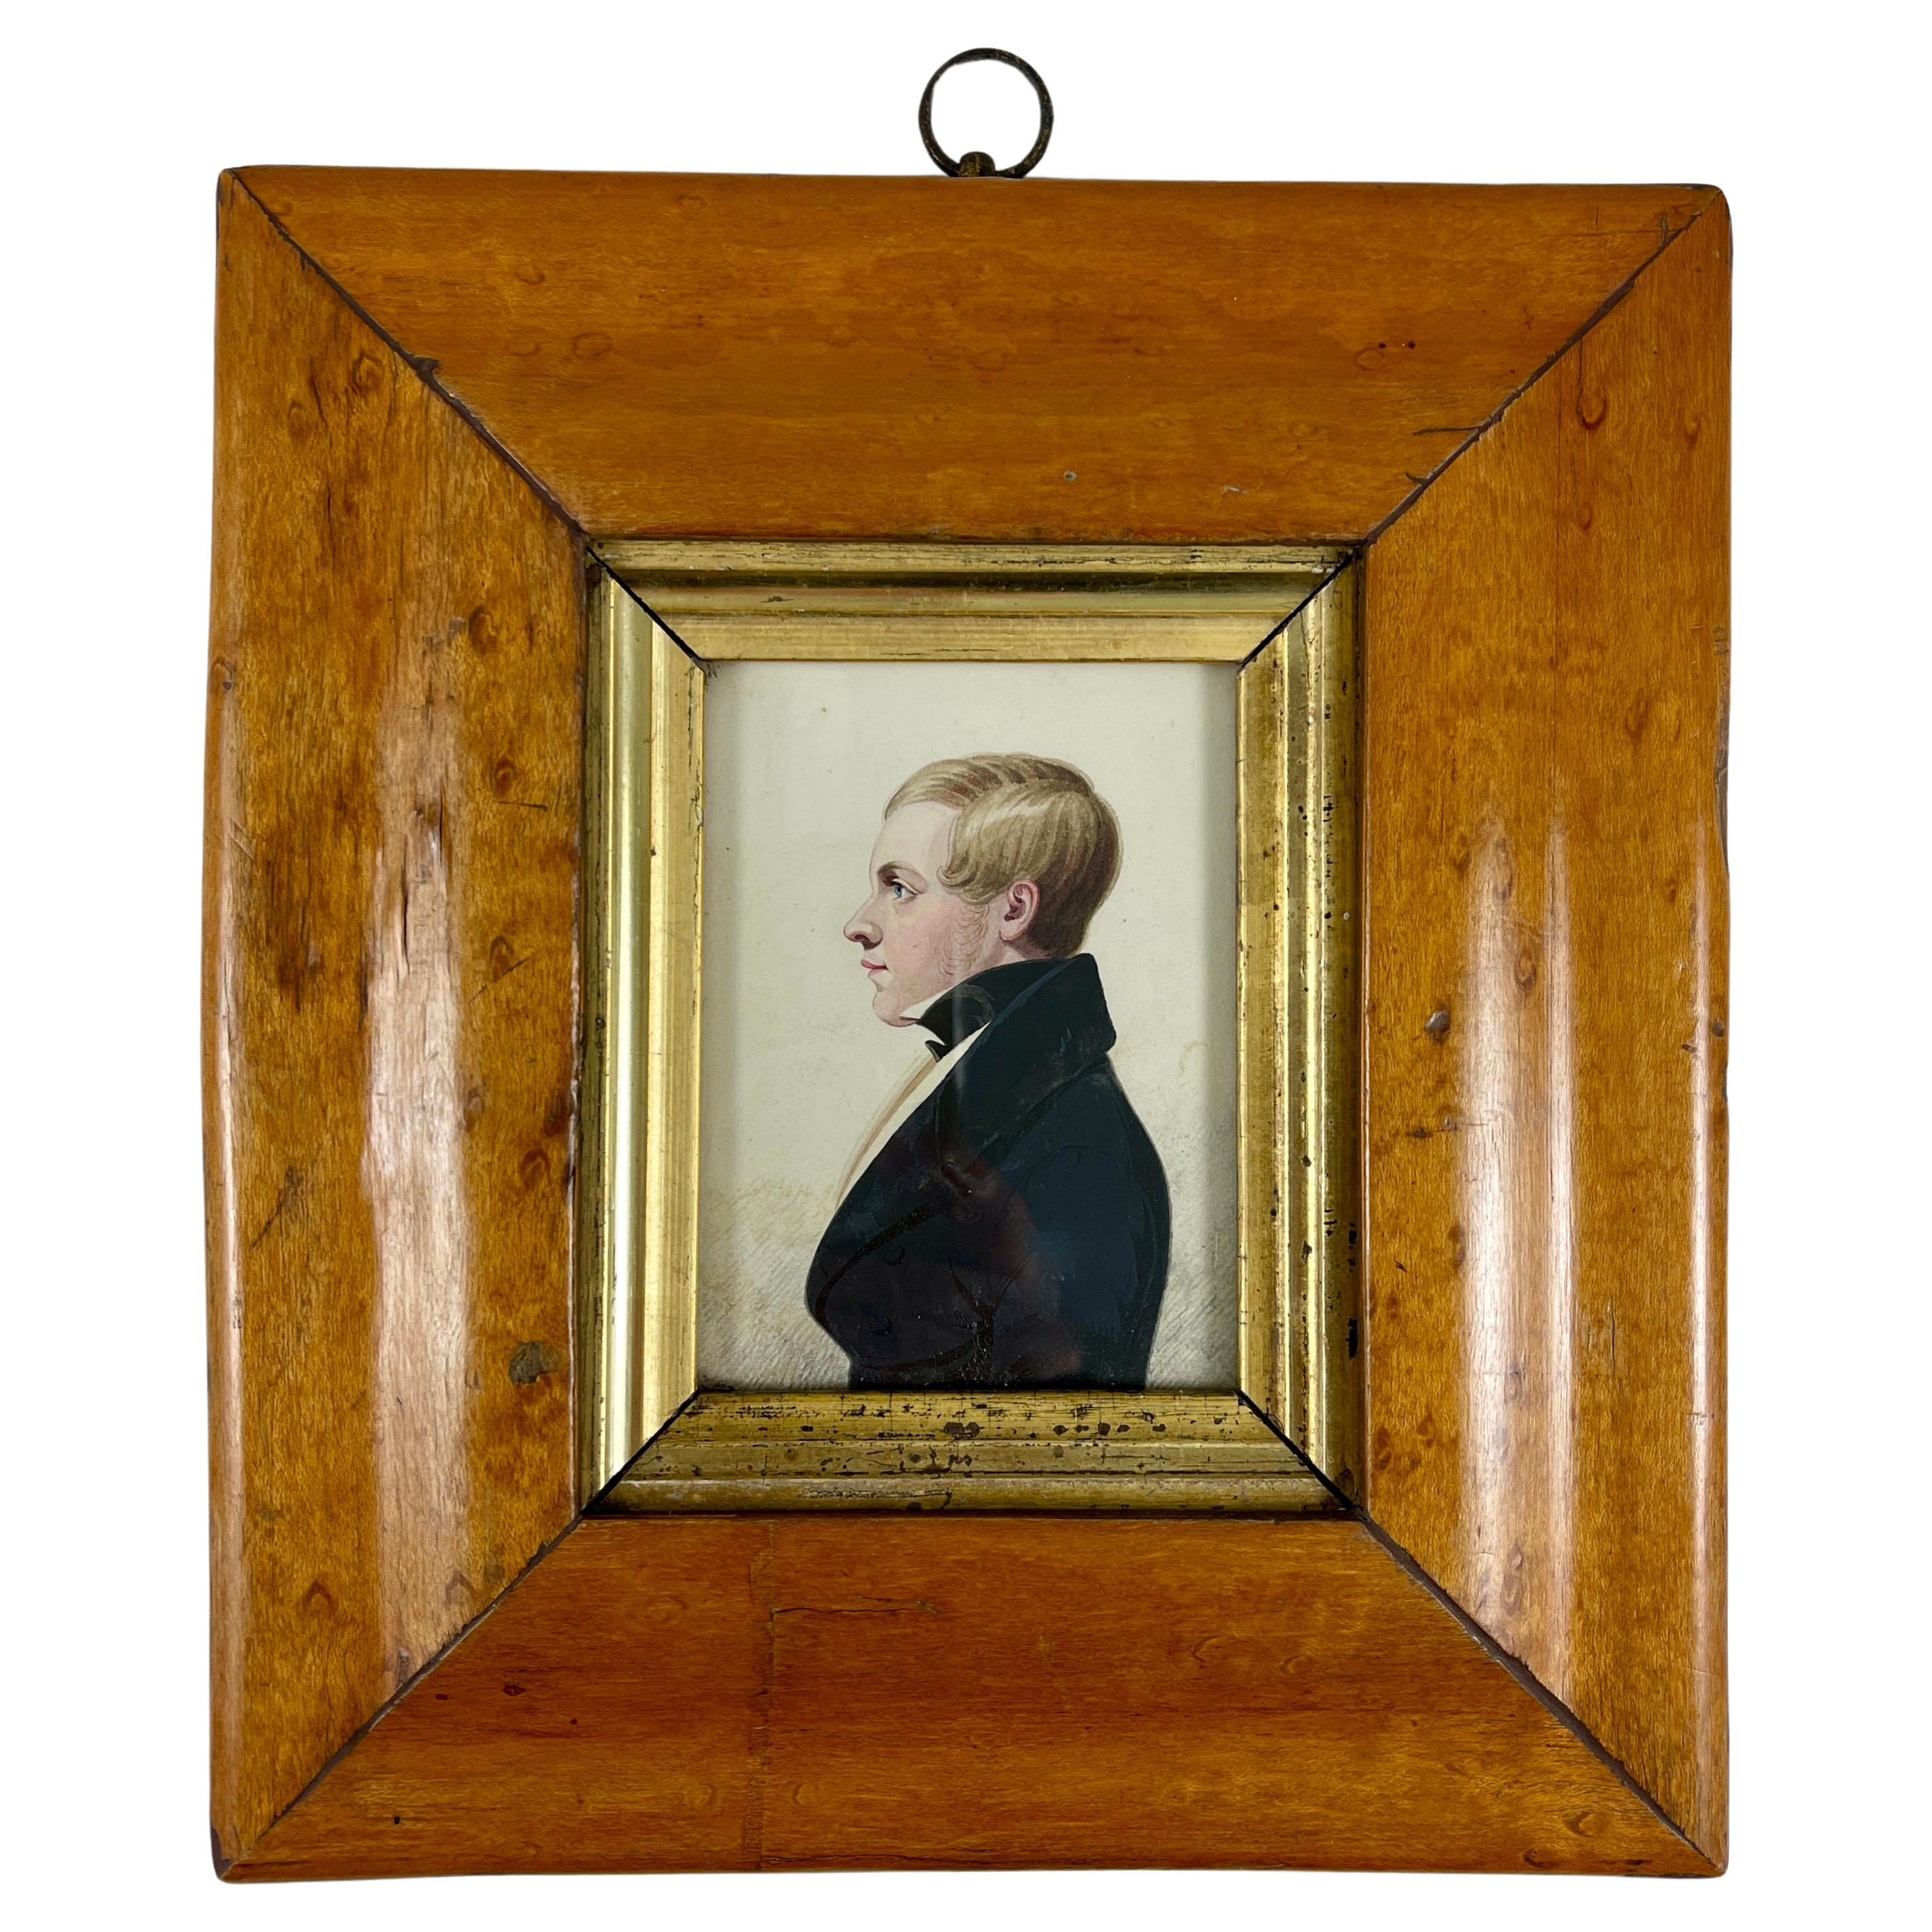 English Regency Period Original Watercolor Fruitwood Frame Portrait of Young Man